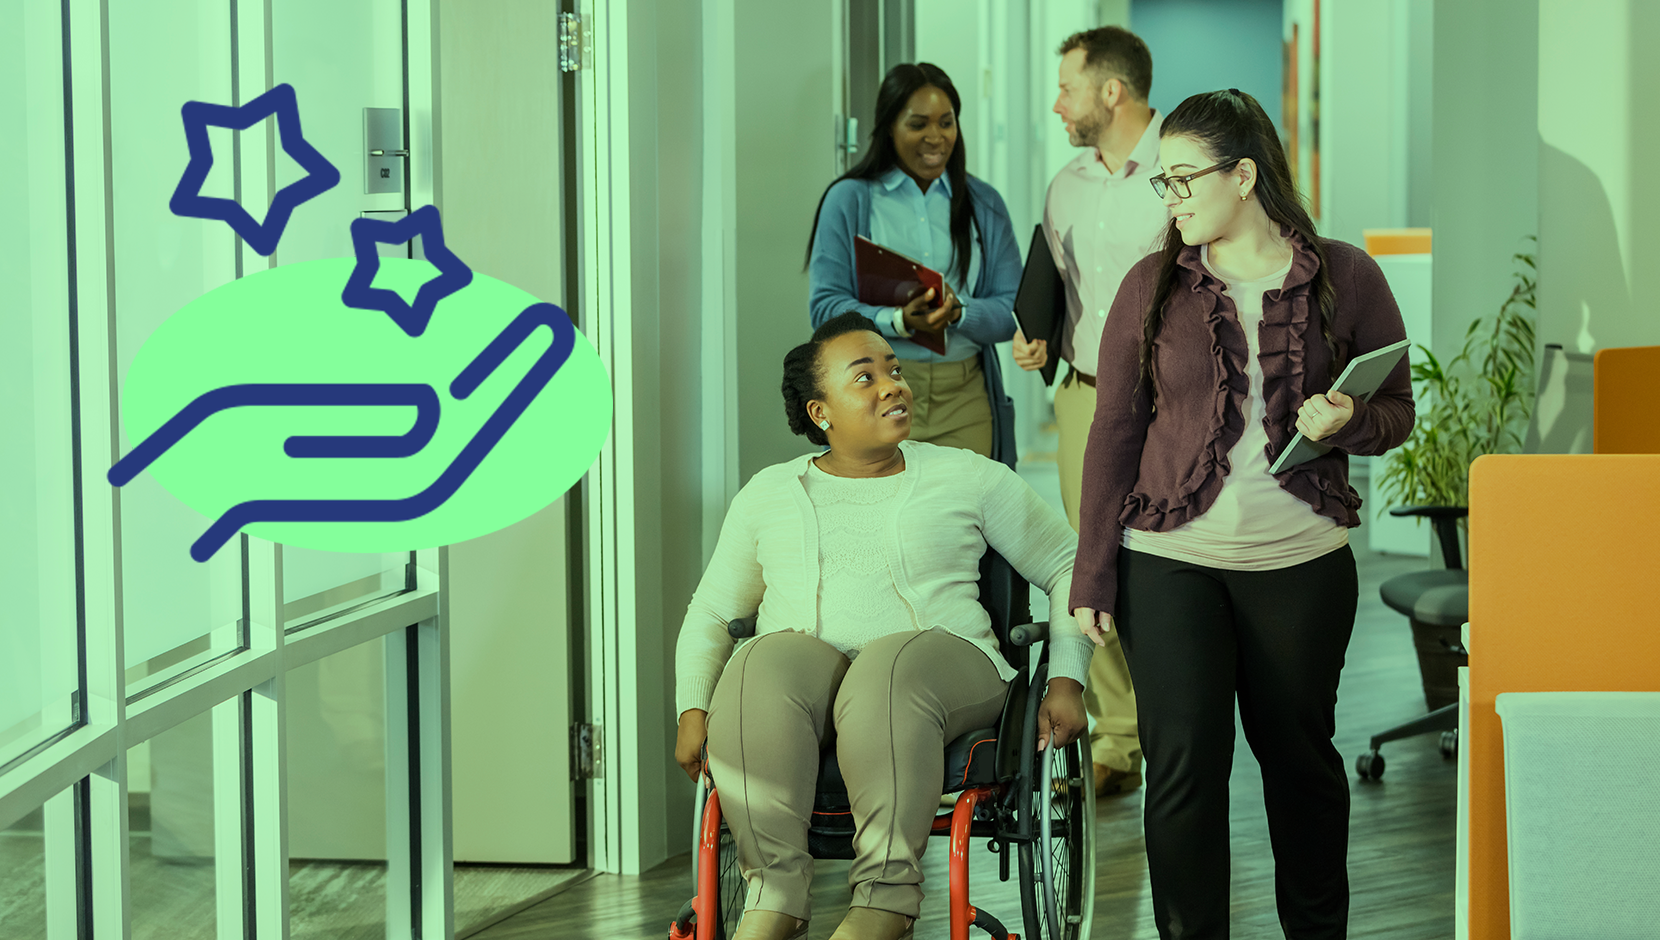 Four people are moving through an office hallway. The person on the front left is using a manual wheelchair. A green filter is applied to the image, with an icon of a hand and stars on the left, broadly representing 'change'.